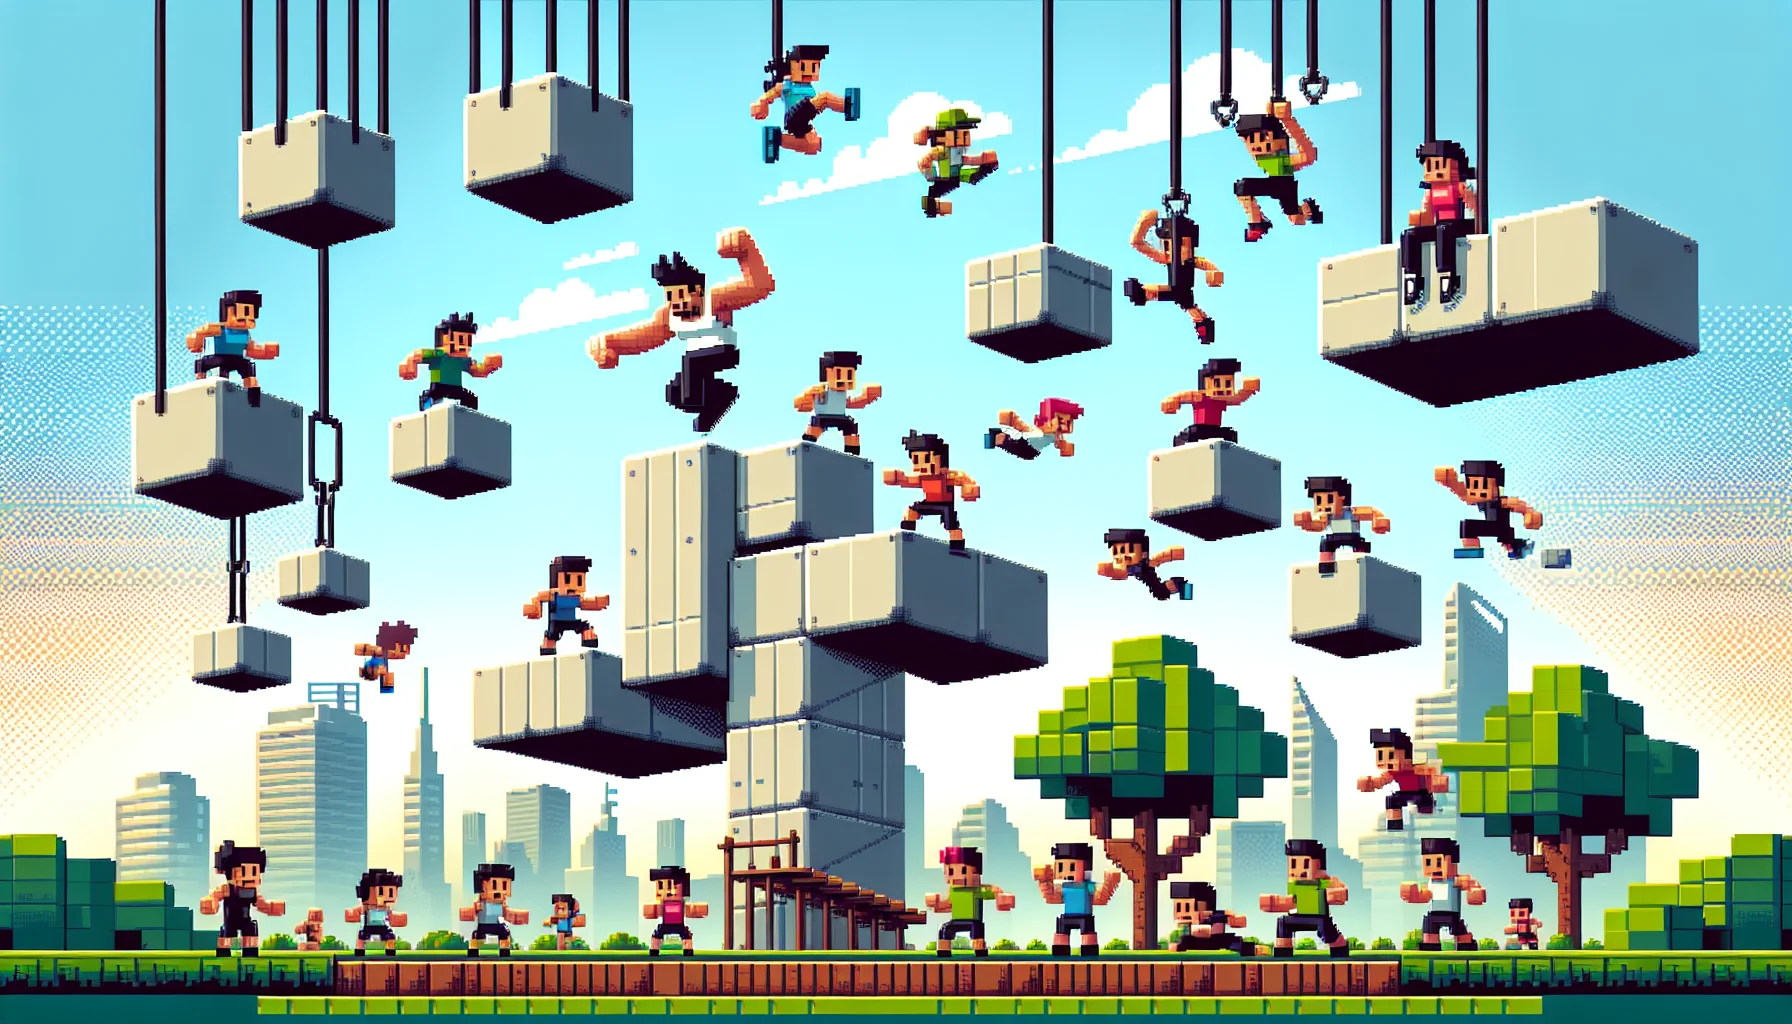 Create a humorous and captivating scene inspired by block-based video game mechanics that promote physical activity. The setting is a pixelated park with a variety of block platforms suspended in mid-air (of various heights and distances), symbolizing a parkour course. Characters crafted with pixels are enthusiastically engaged in this parkour challenge. Some characters are jumping from block to block, some are swinging from pixelated vines and others are teetering near the edges, creating funny moments. The characters are of varying genders and descents, such as Asian, Hispanic, Caucasian, and Black to encapsulate the universal appeal of physical exercise.